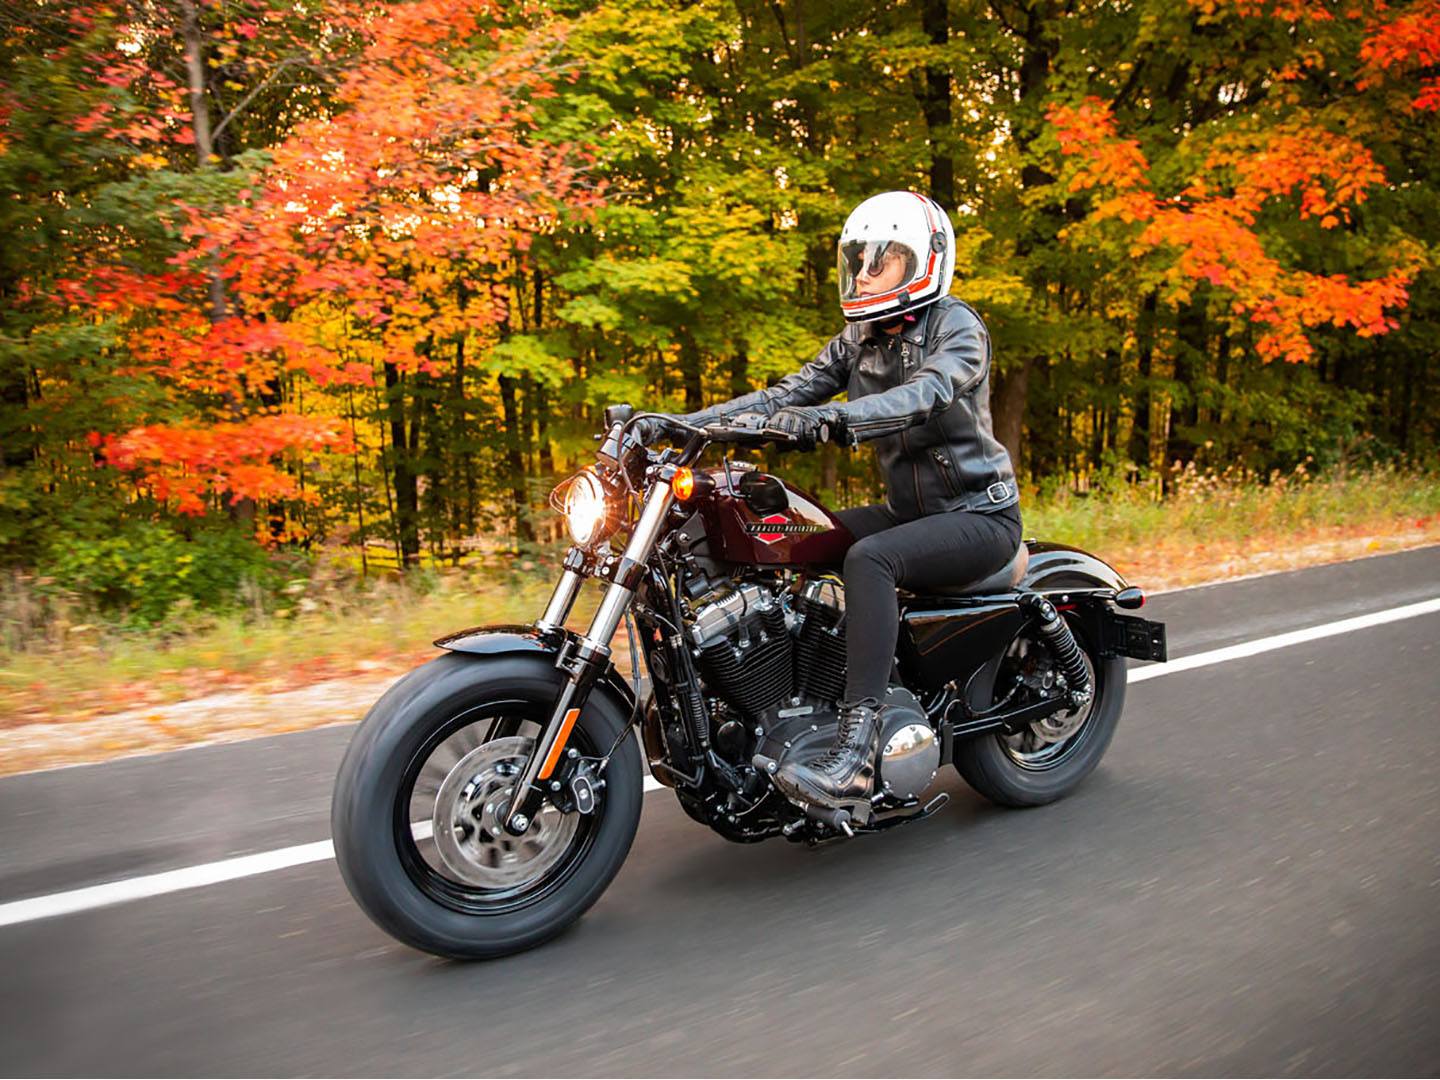 2021 Harley-Davidson Forty-Eight® in West Long Branch, New Jersey - Photo 18